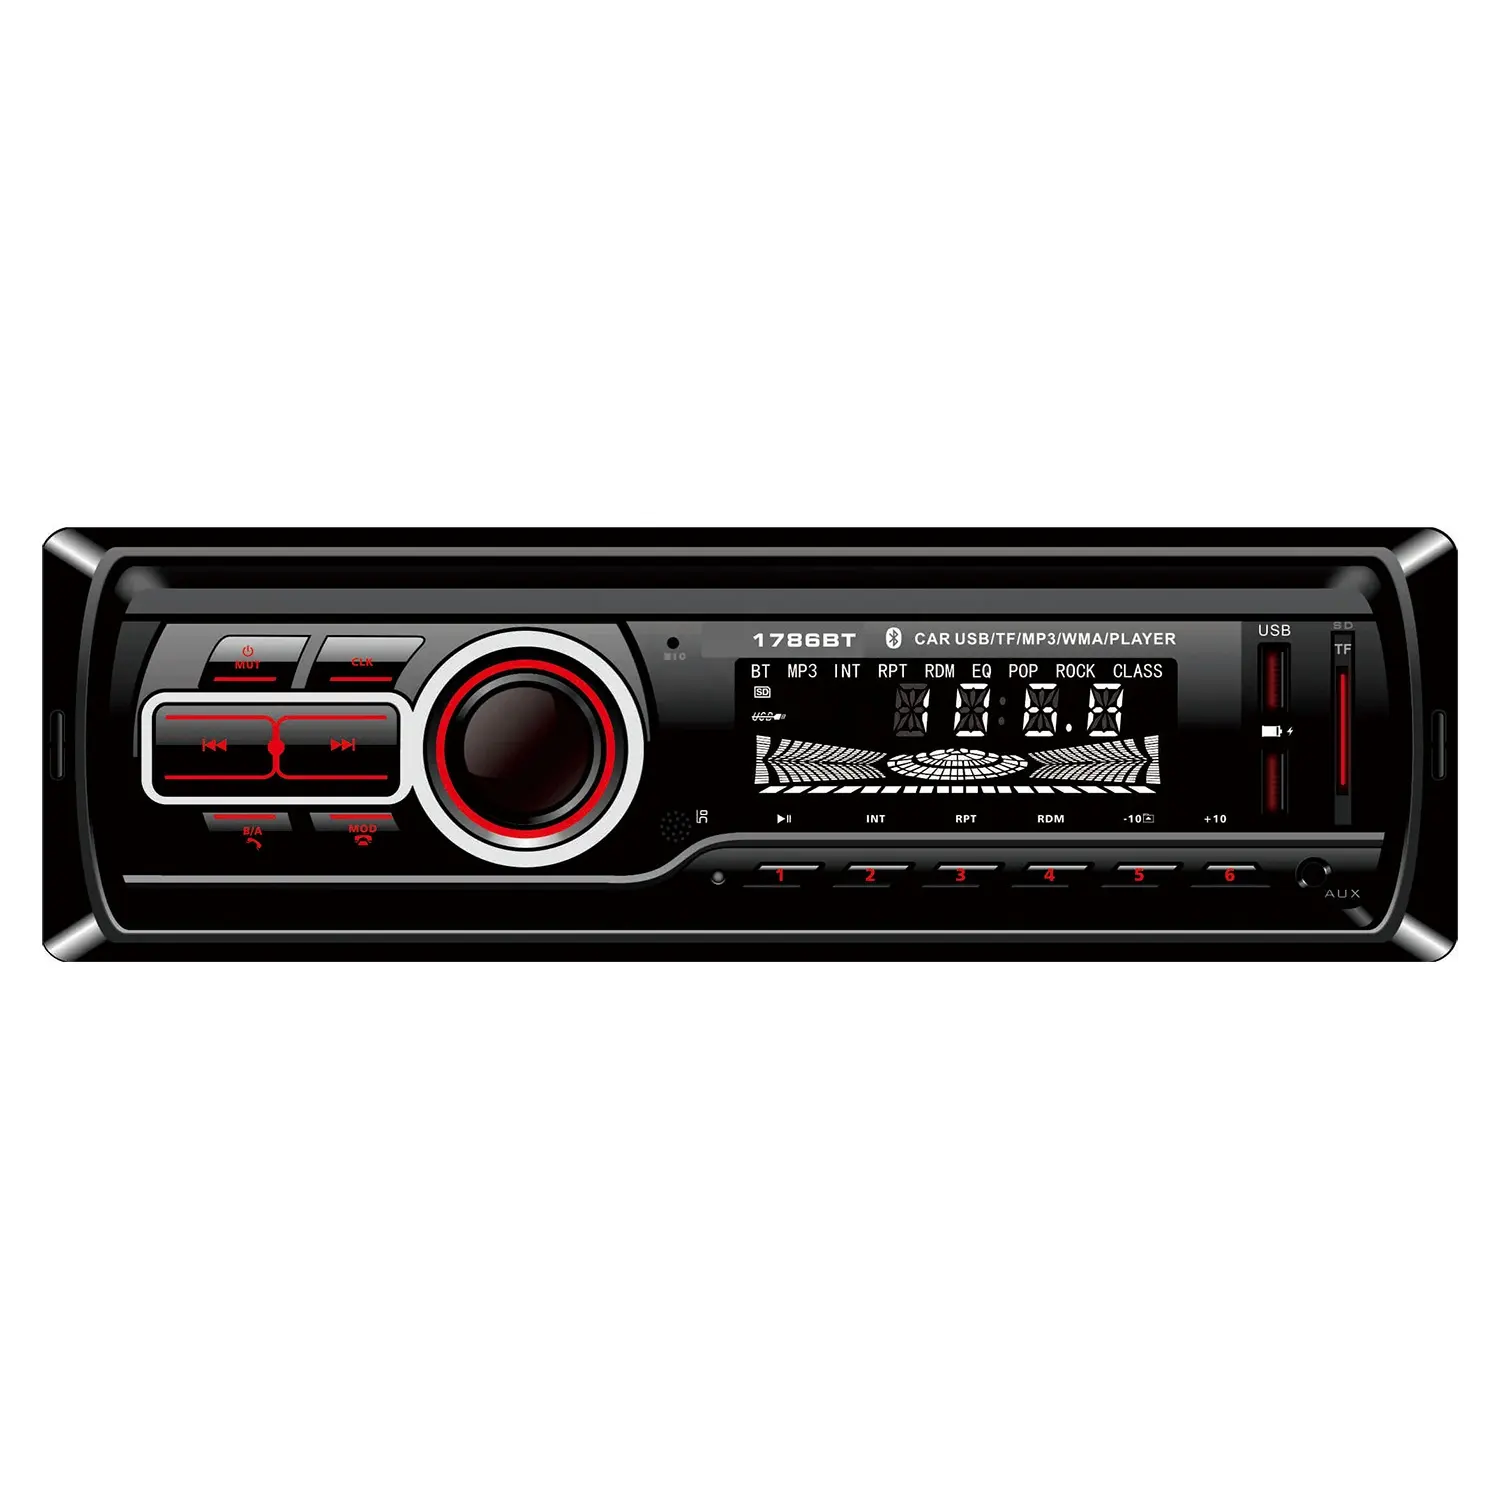 bluetooth Color Lcd Mp3 Player with 1 Din Car Stereo auto electronics radio with remote